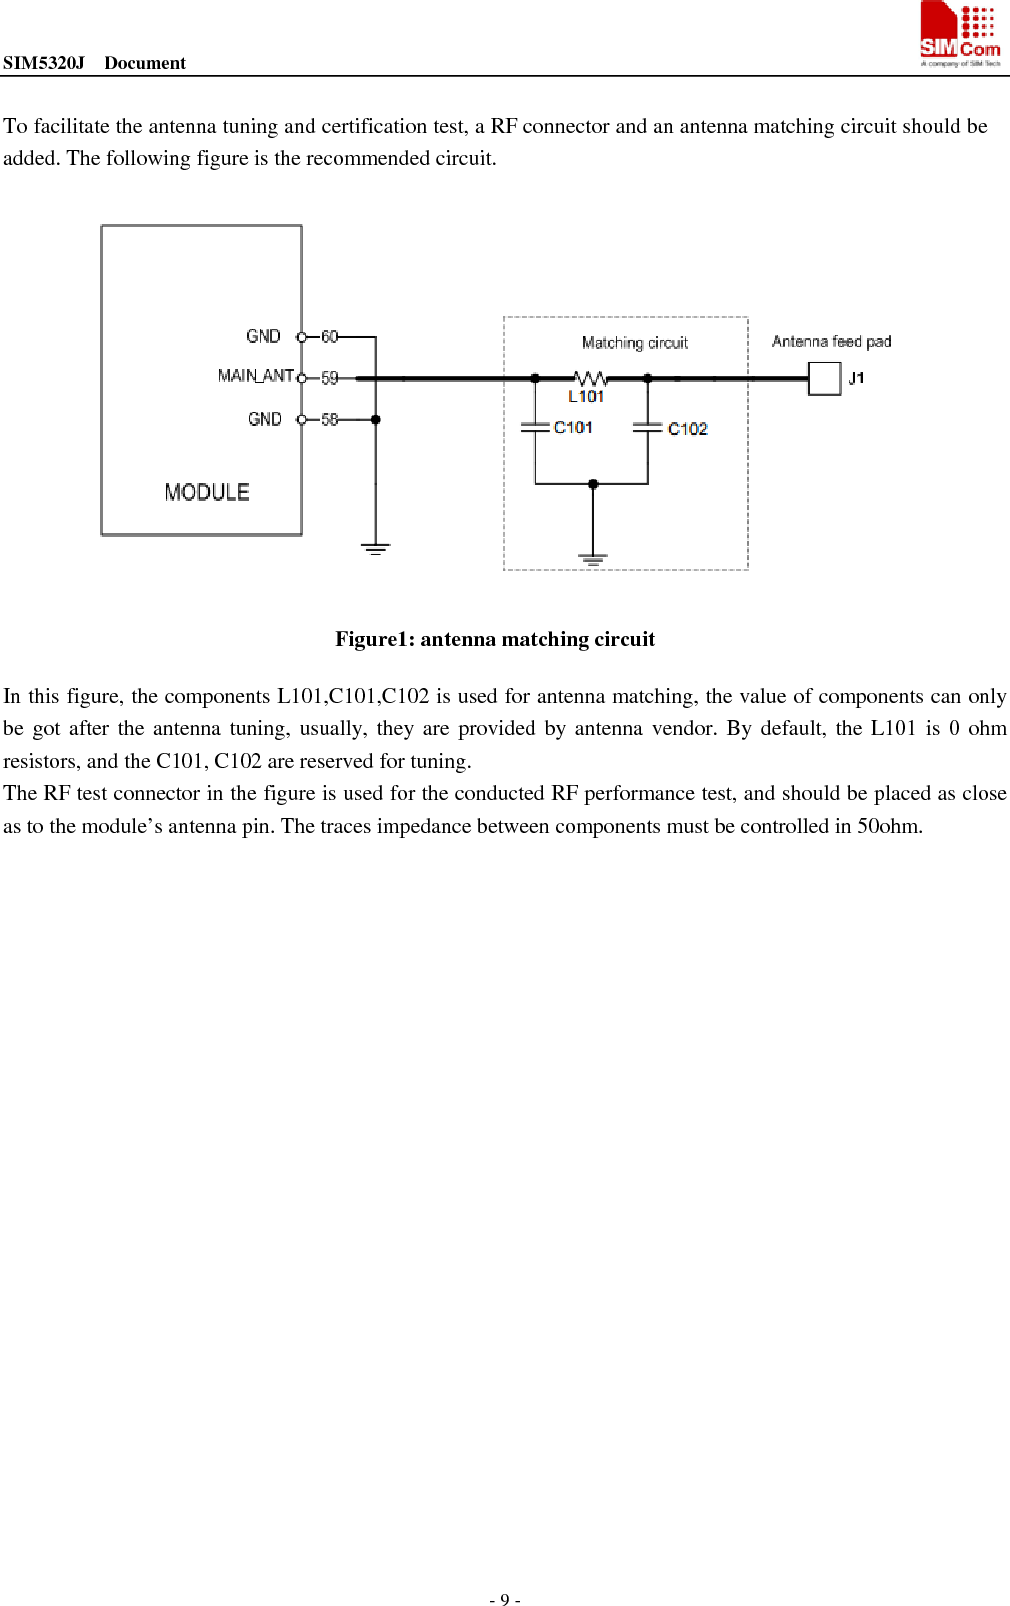 SIM5320J  Document                                                                                - 9 -  To facilitate the antenna tuning and certification test, a RF connector and an antenna matching circuit should be added. The following figure is the recommended circuit.   Figure1: antenna matching circuit In this figure, the components L101,C101,C102 is used for antenna matching, the value of components can only be got after the antenna tuning, usually, they are provided by antenna vendor. By default, the L101 is 0 ohm resistors, and the C101, C102 are reserved for tuning.   The RF test connector in the figure is used for the conducted RF performance test, and should be placed as close as to the module’s antenna pin. The traces impedance between components must be controlled in 50ohm. 